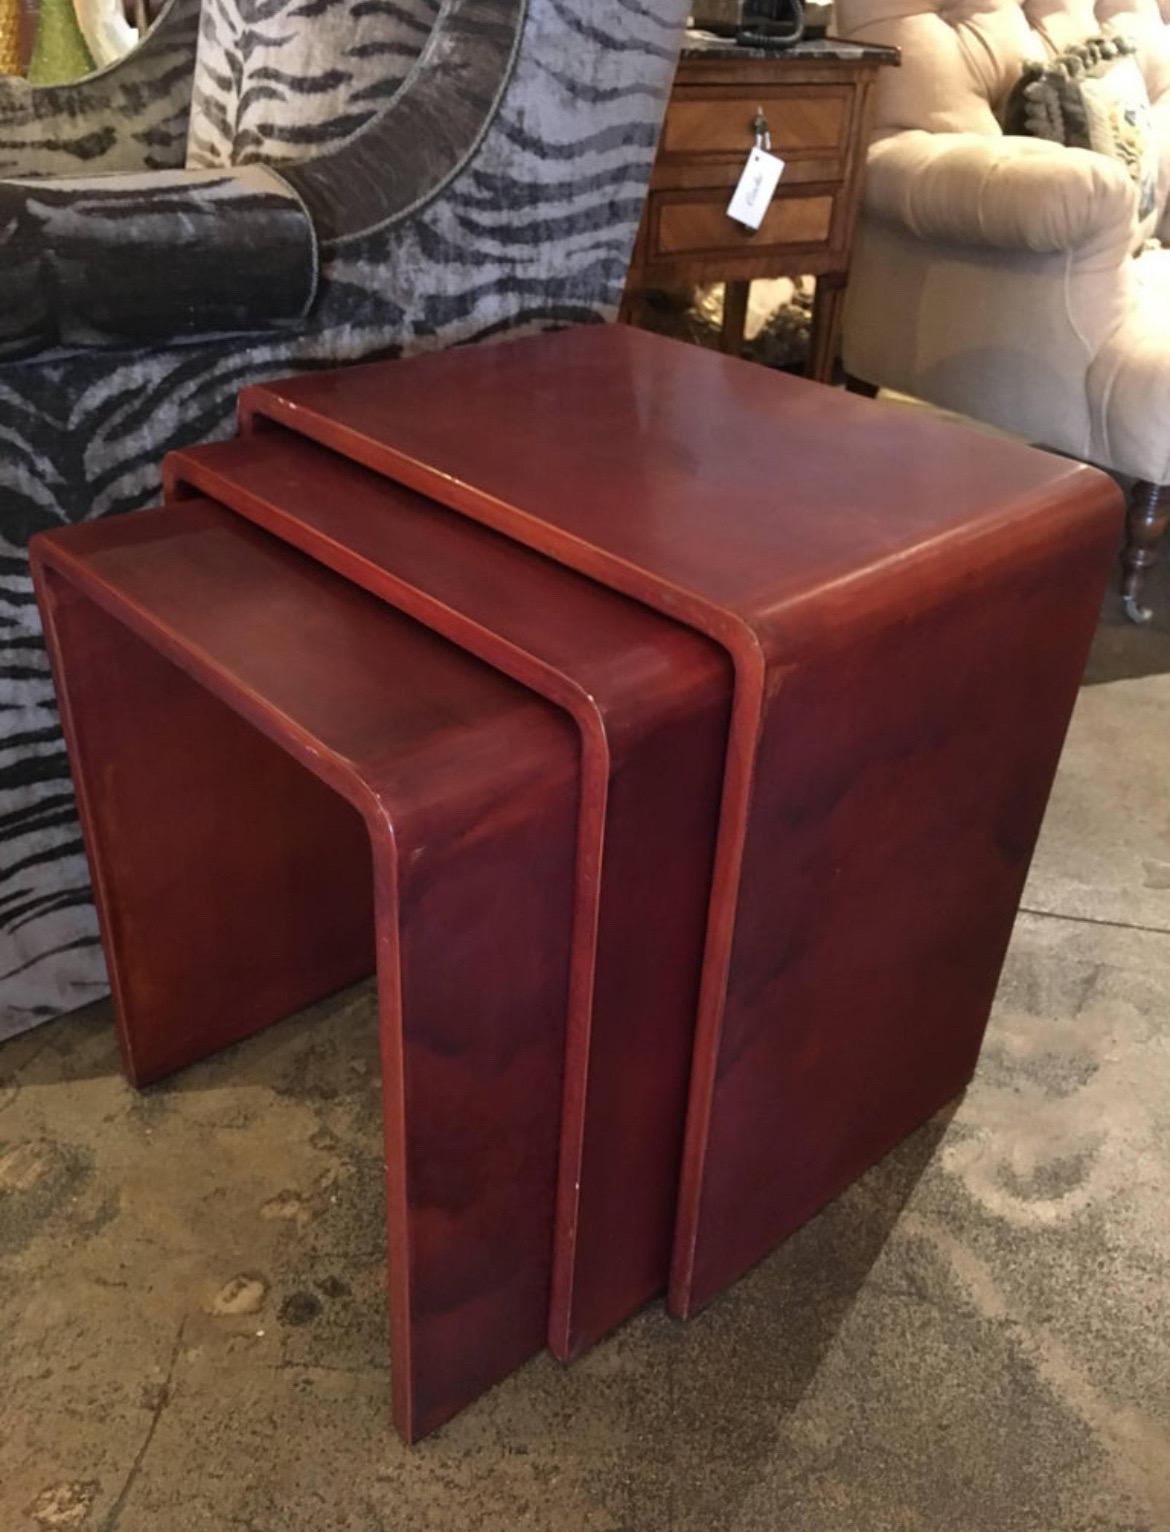 Set of three vintage Mid-Century Modernist waterfall nesting or stacking tables in rare burgundy lacquer finish.

In the style of Jean-Michel Frank